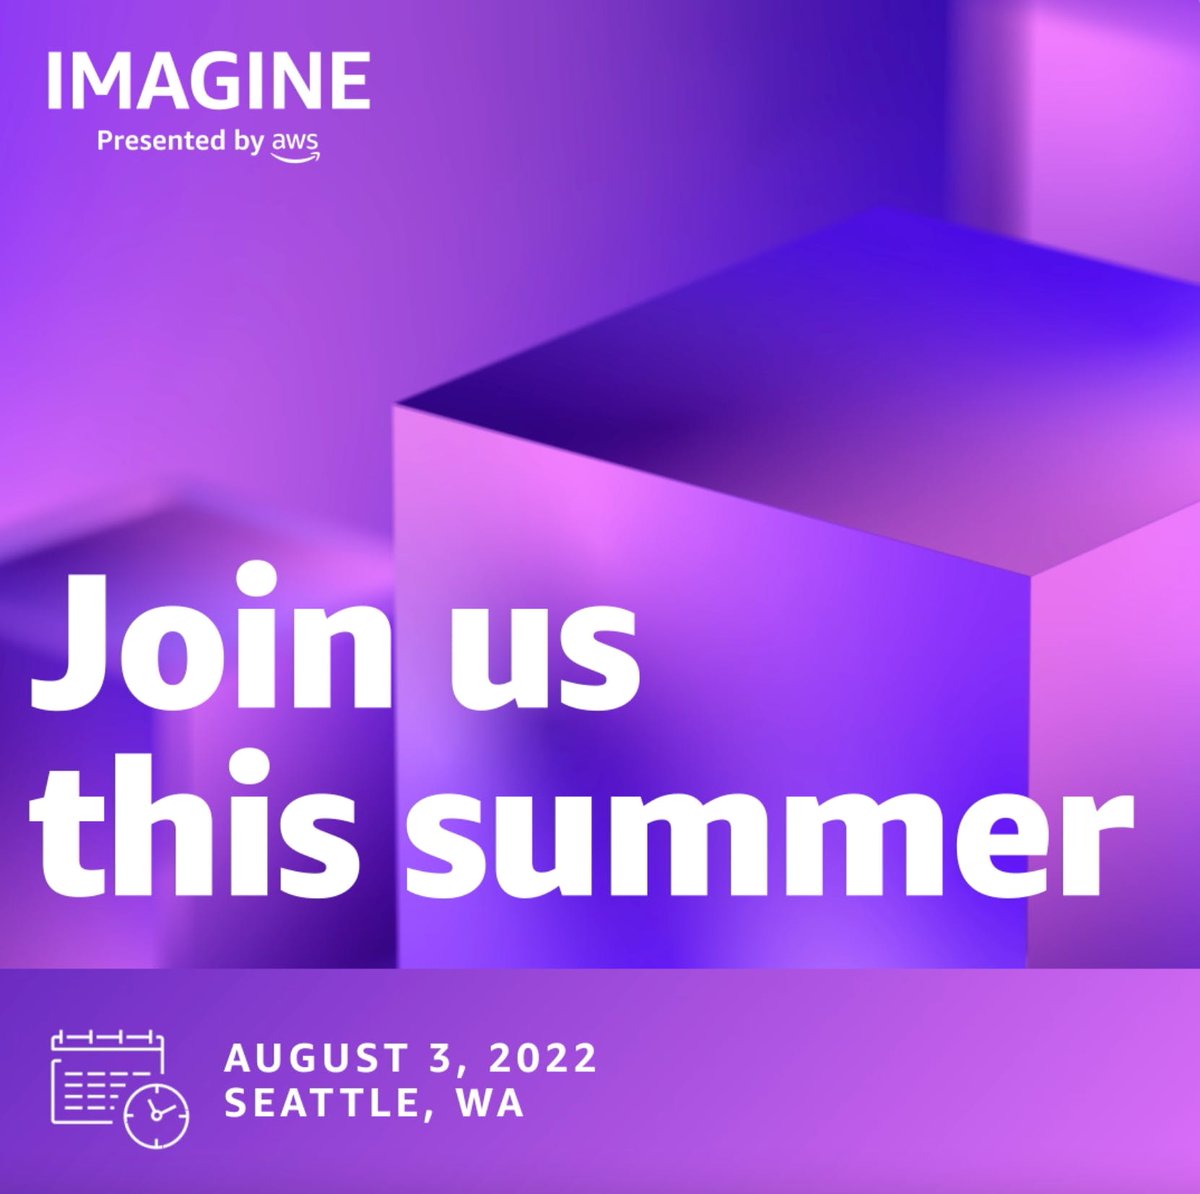 ☀️ This summer at #AWSImagine, 👂 hear inspiring 📖 stories from your peers about the challenges they've overcome by innovating with cloud technology in the public sector. aws.amazon.com/government-edu… go.aws/3c5j4f5